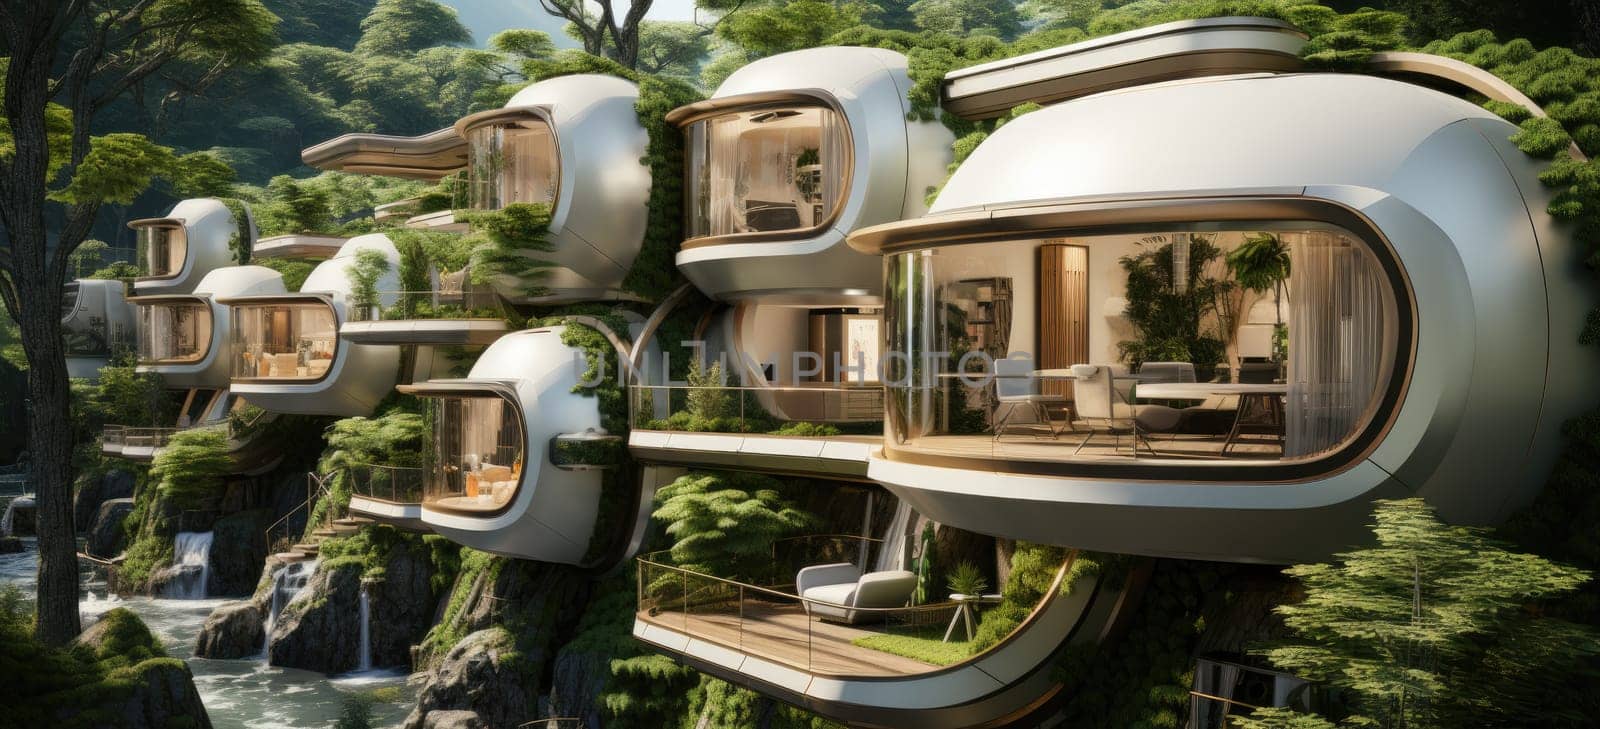 Life-giving nature around compact capsule houses.